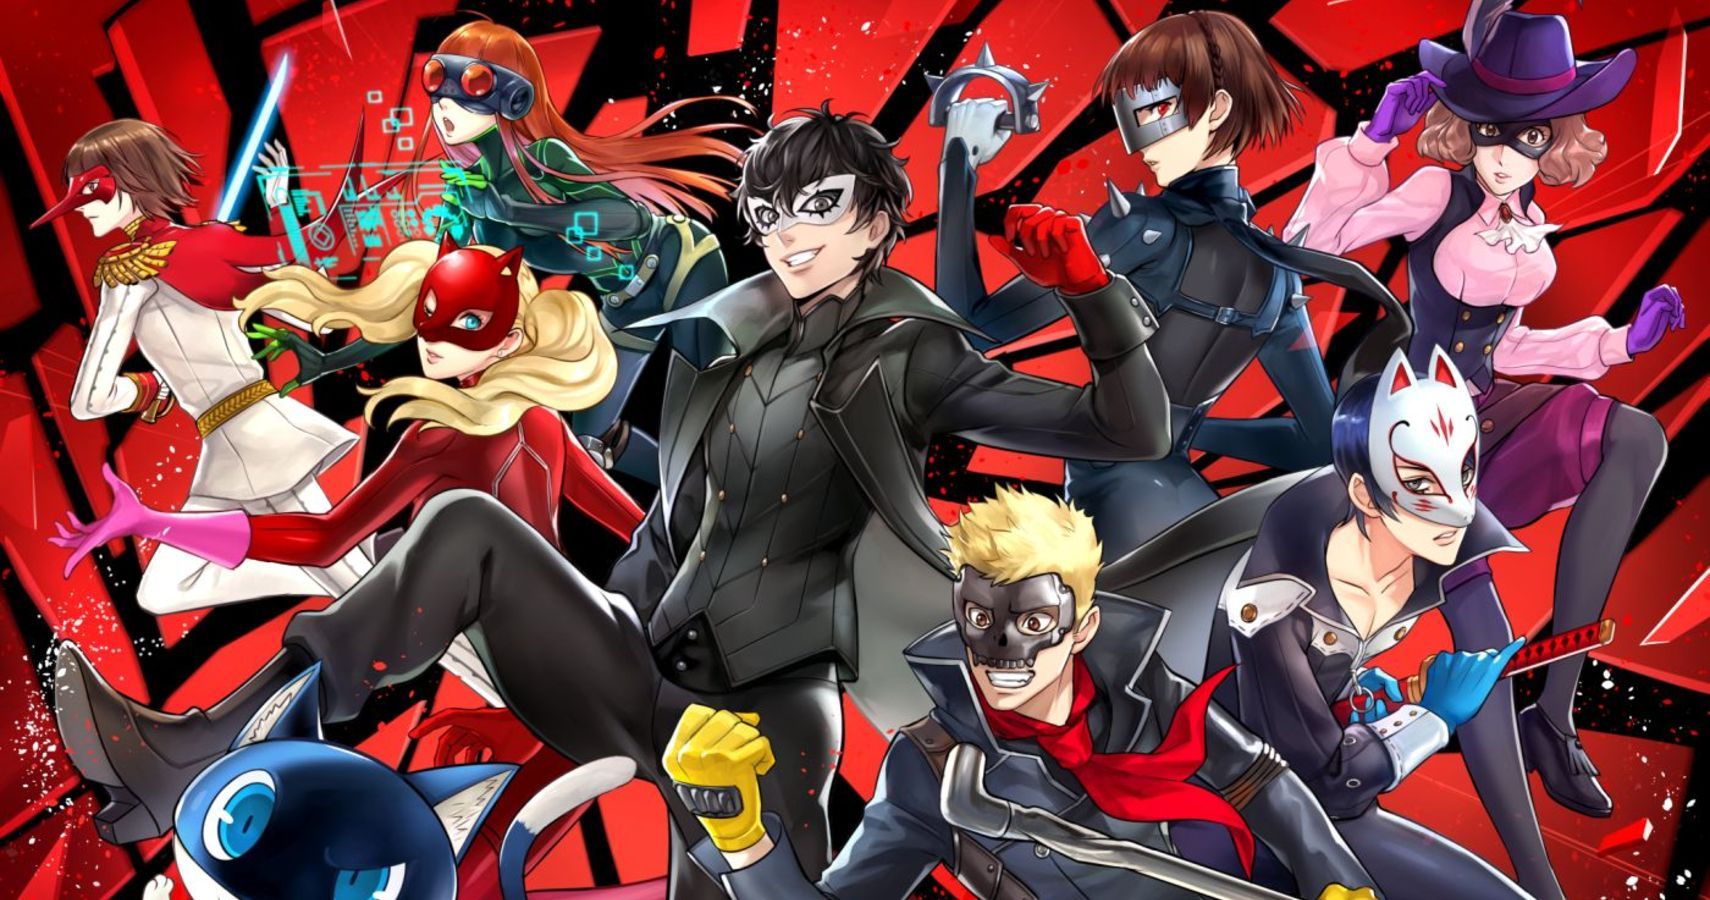 The Phantom Thieves From Persona 5 Should Appear In Tokyo Mirage ...